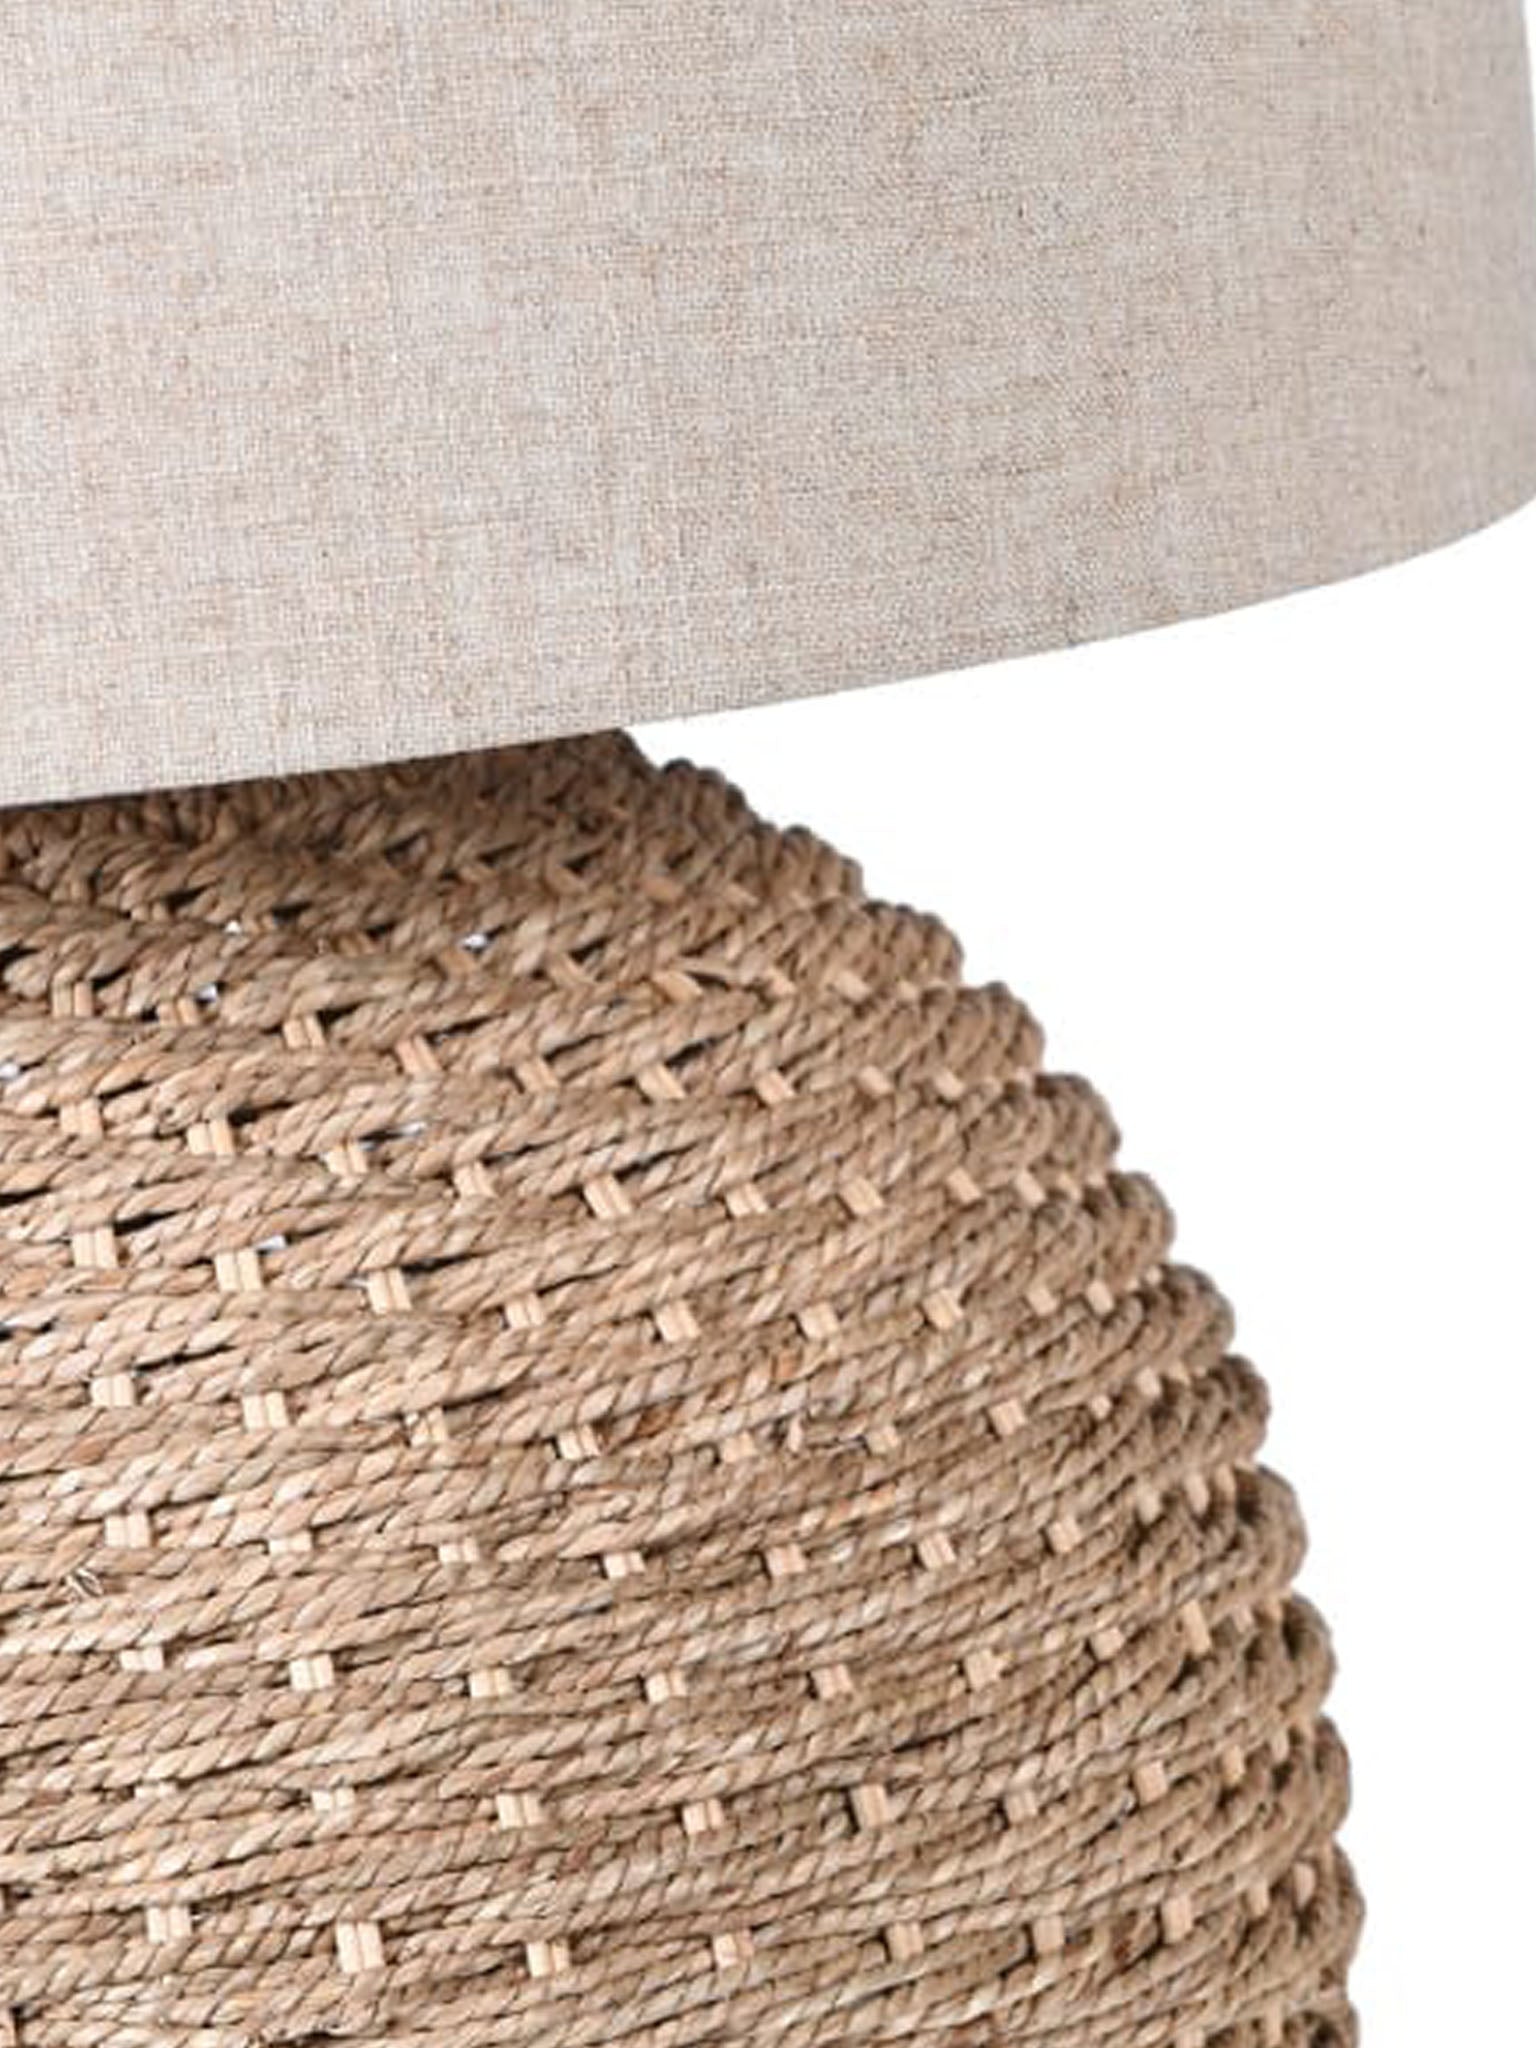 rattan lamp base and linen cylinder shade